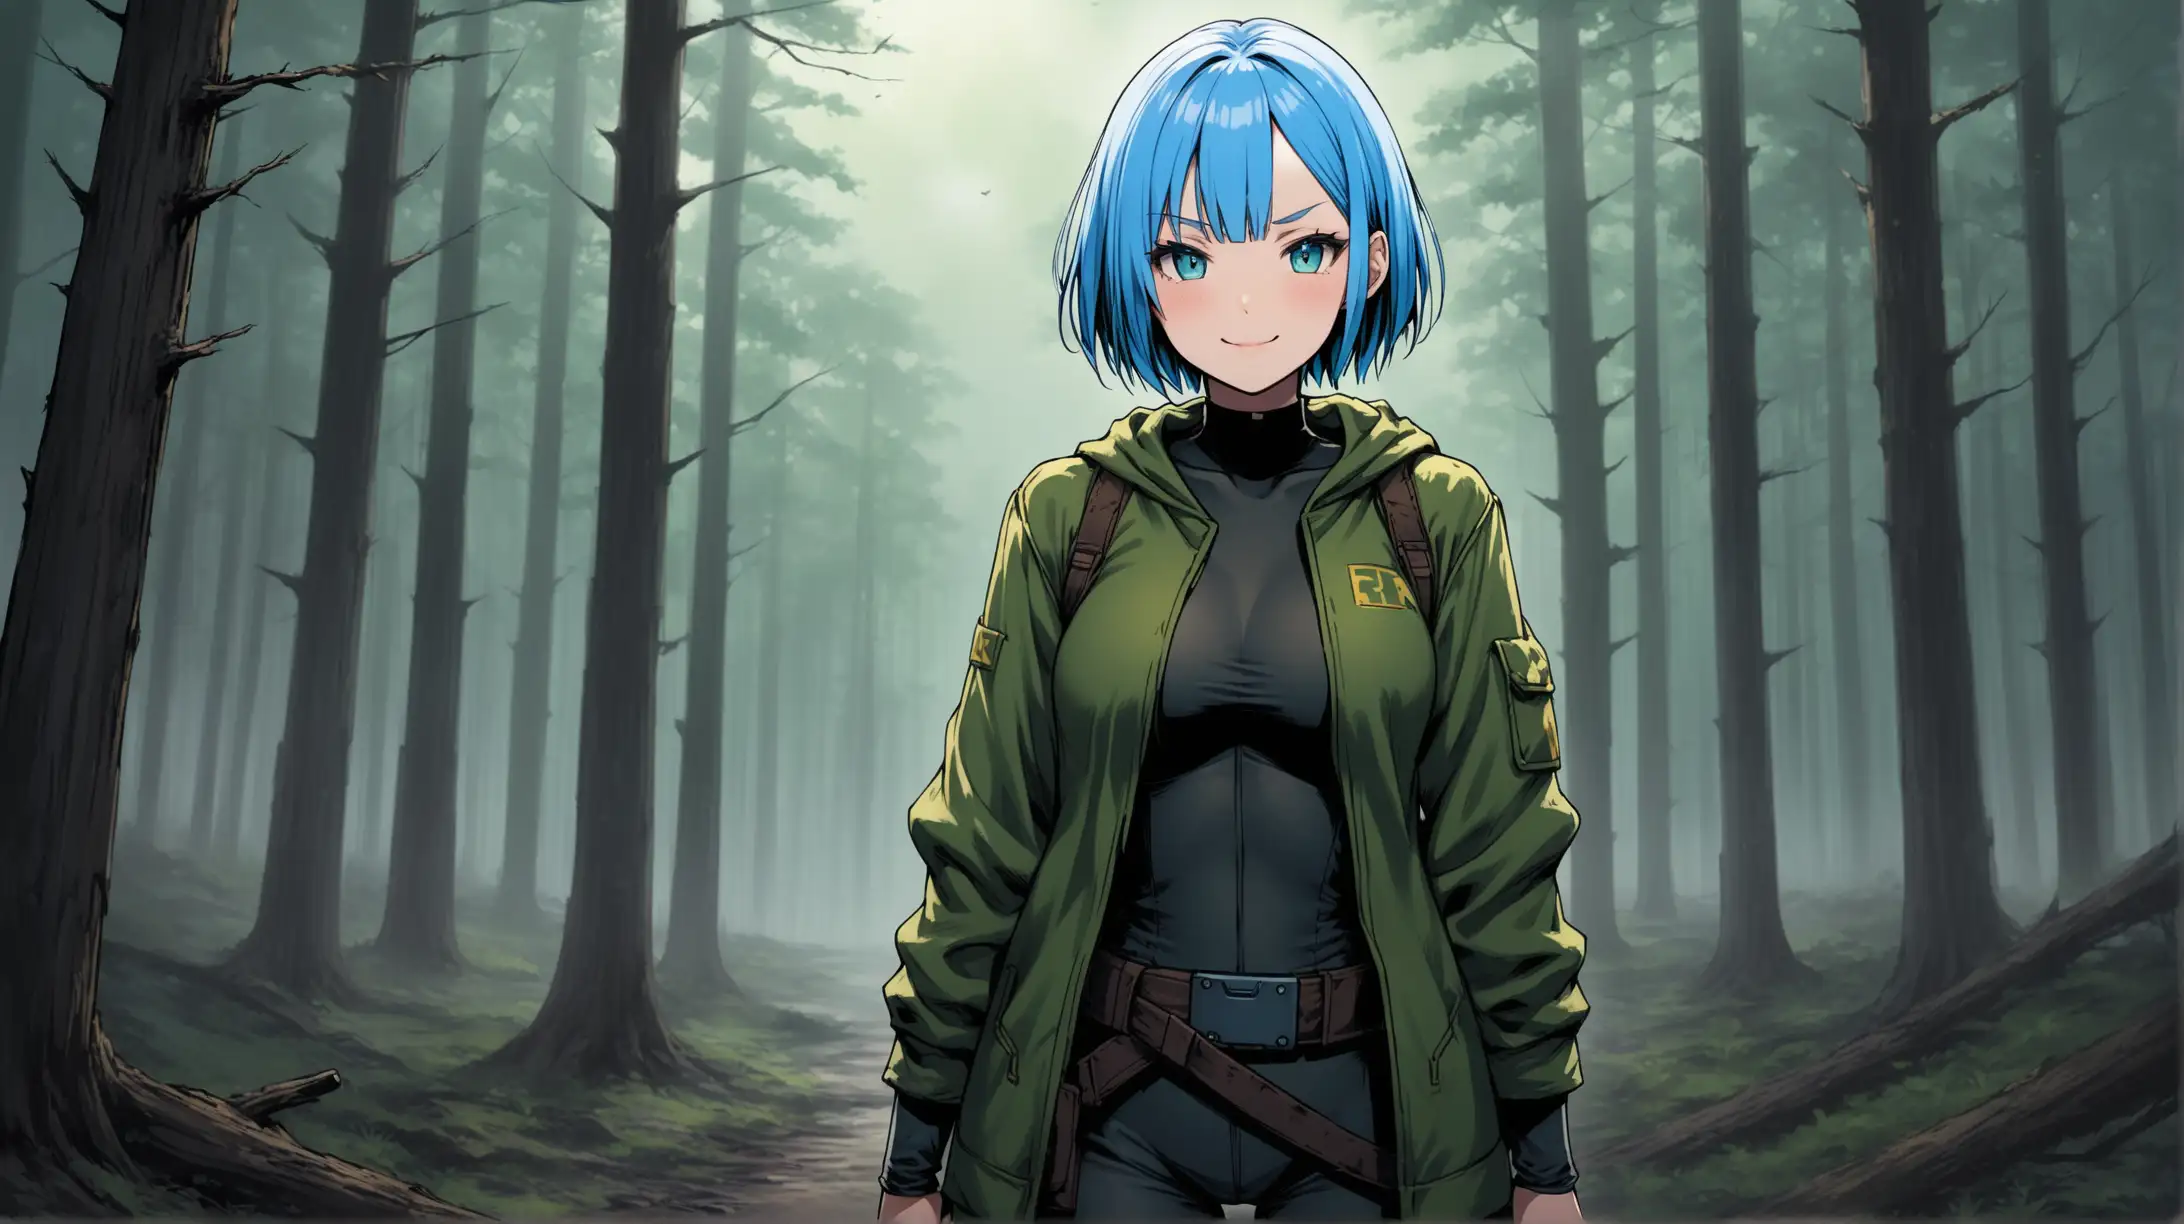 Rem from Fallout Series in Eerie Forest